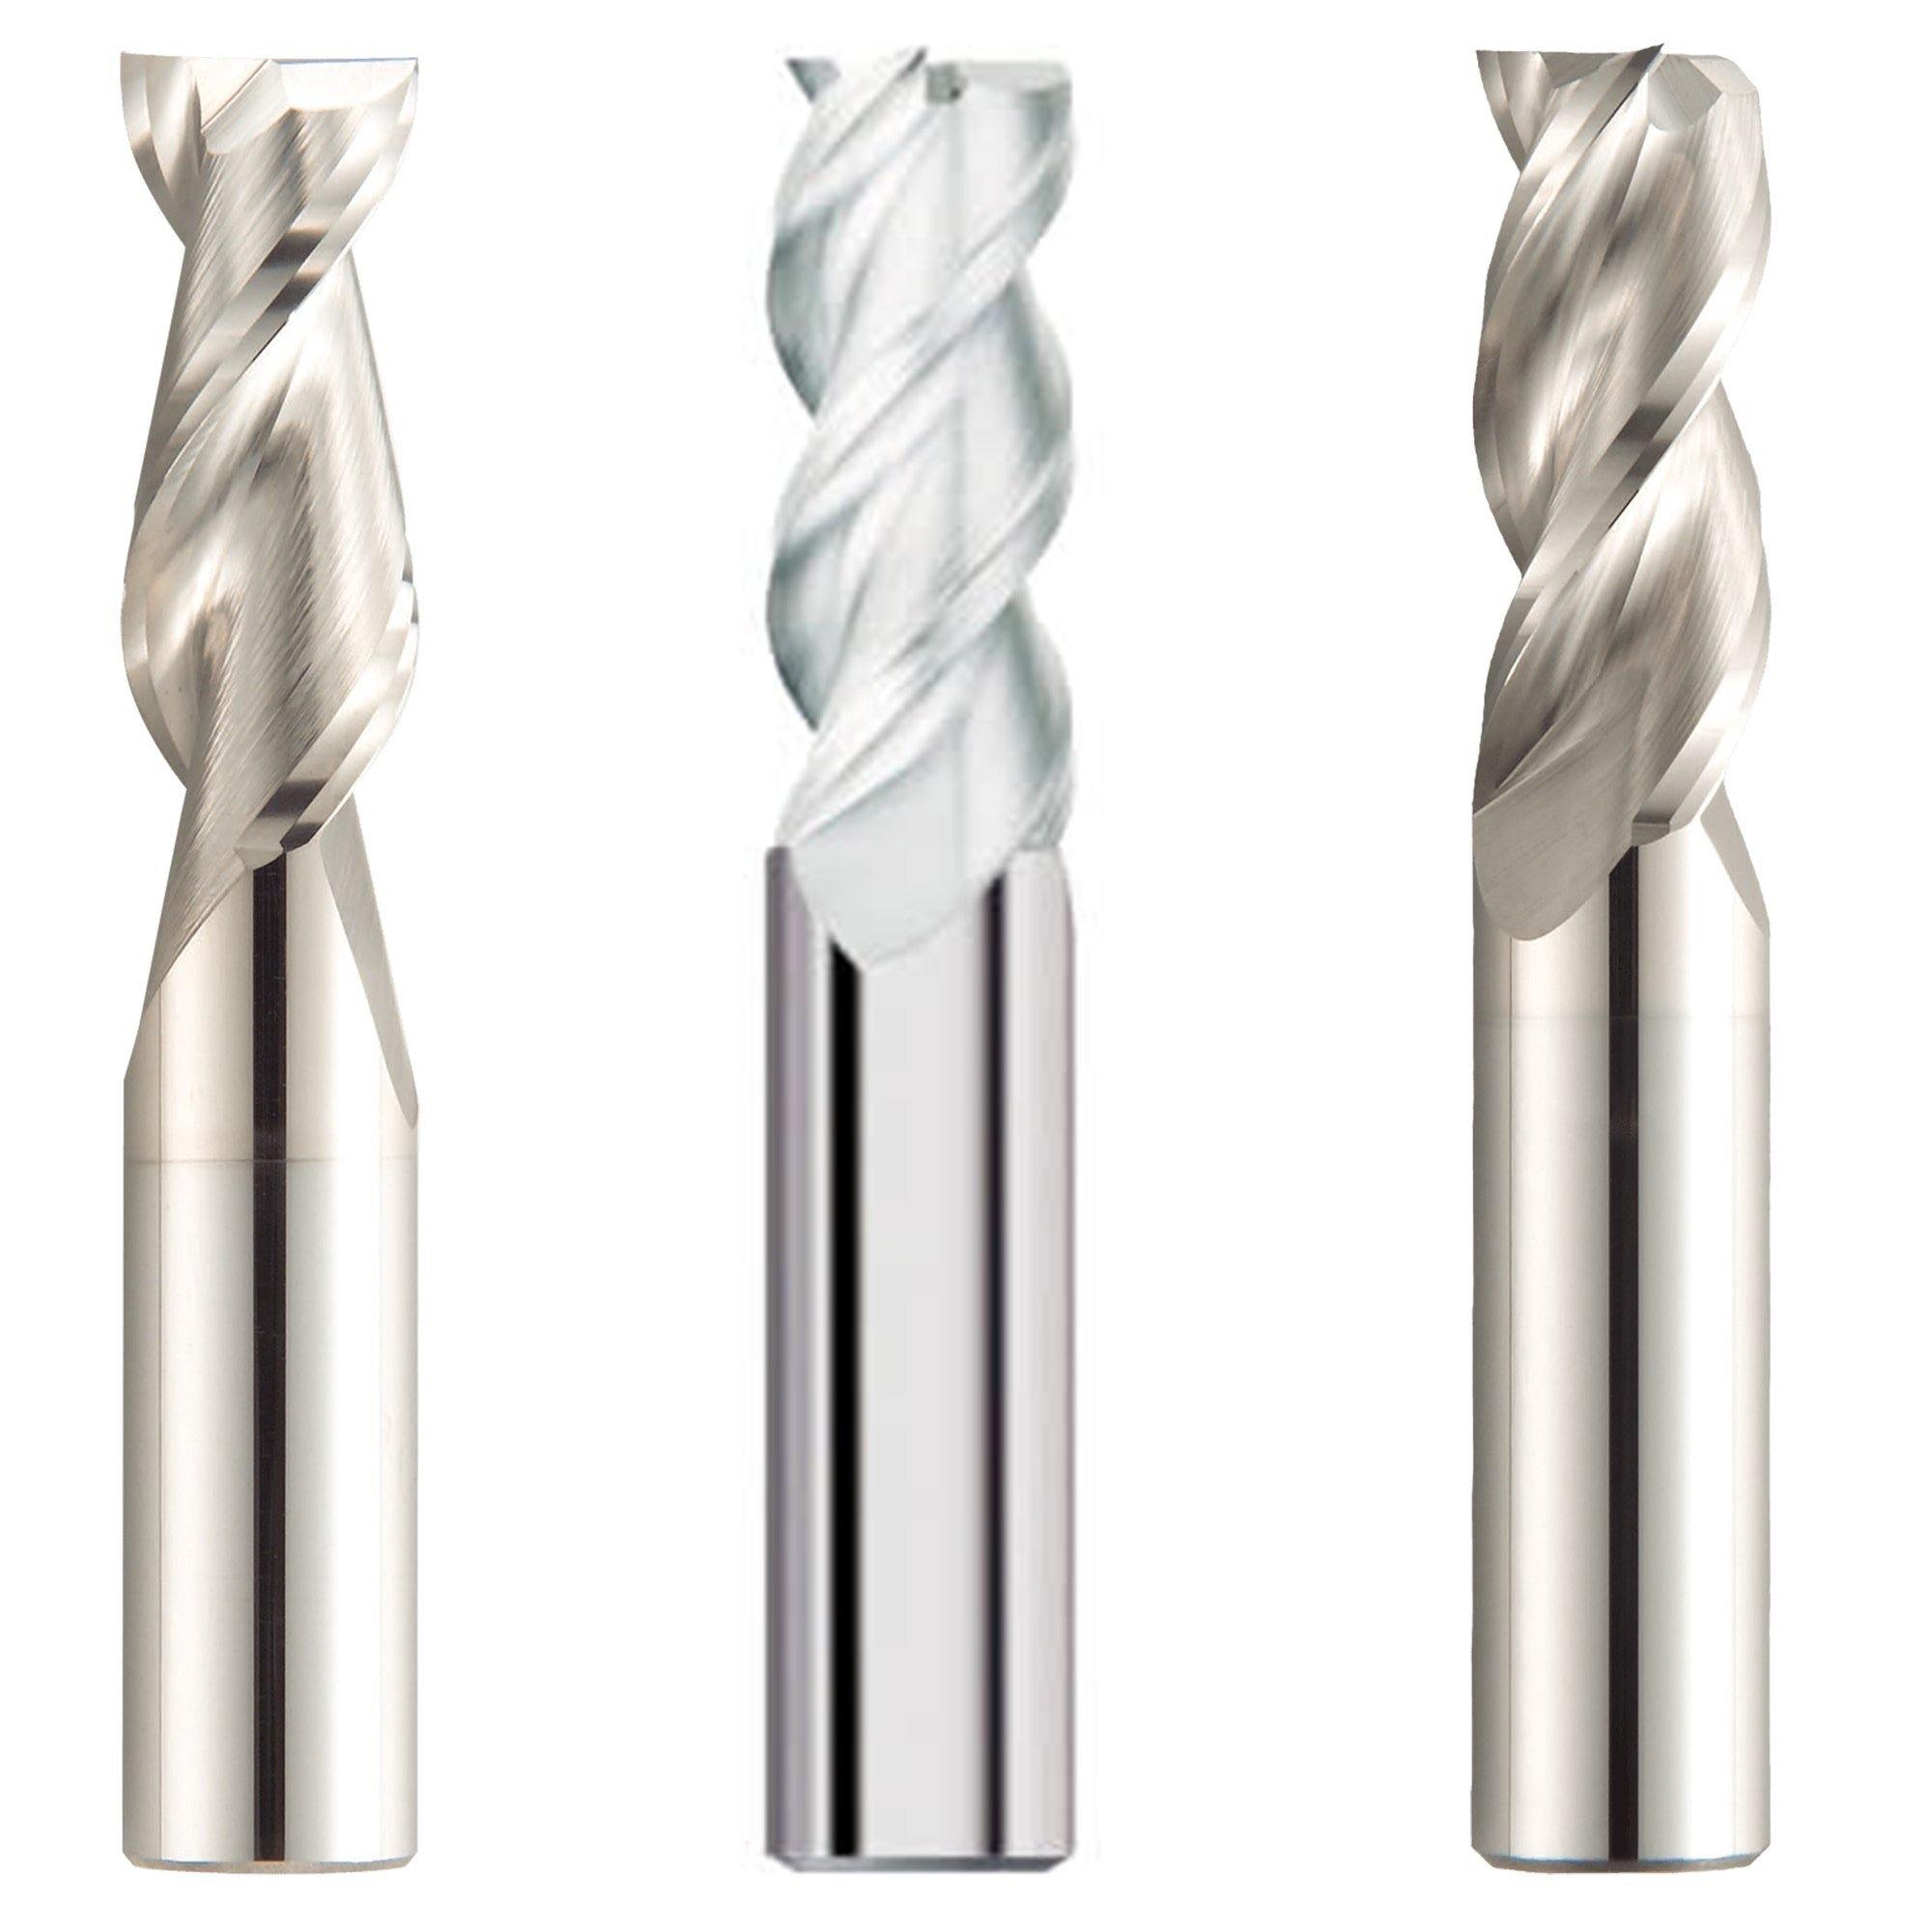 (3 Pack) 3/8" x 1-3/4" x 4" Aluminum HP Carbide End Mills - The End Mill Store 